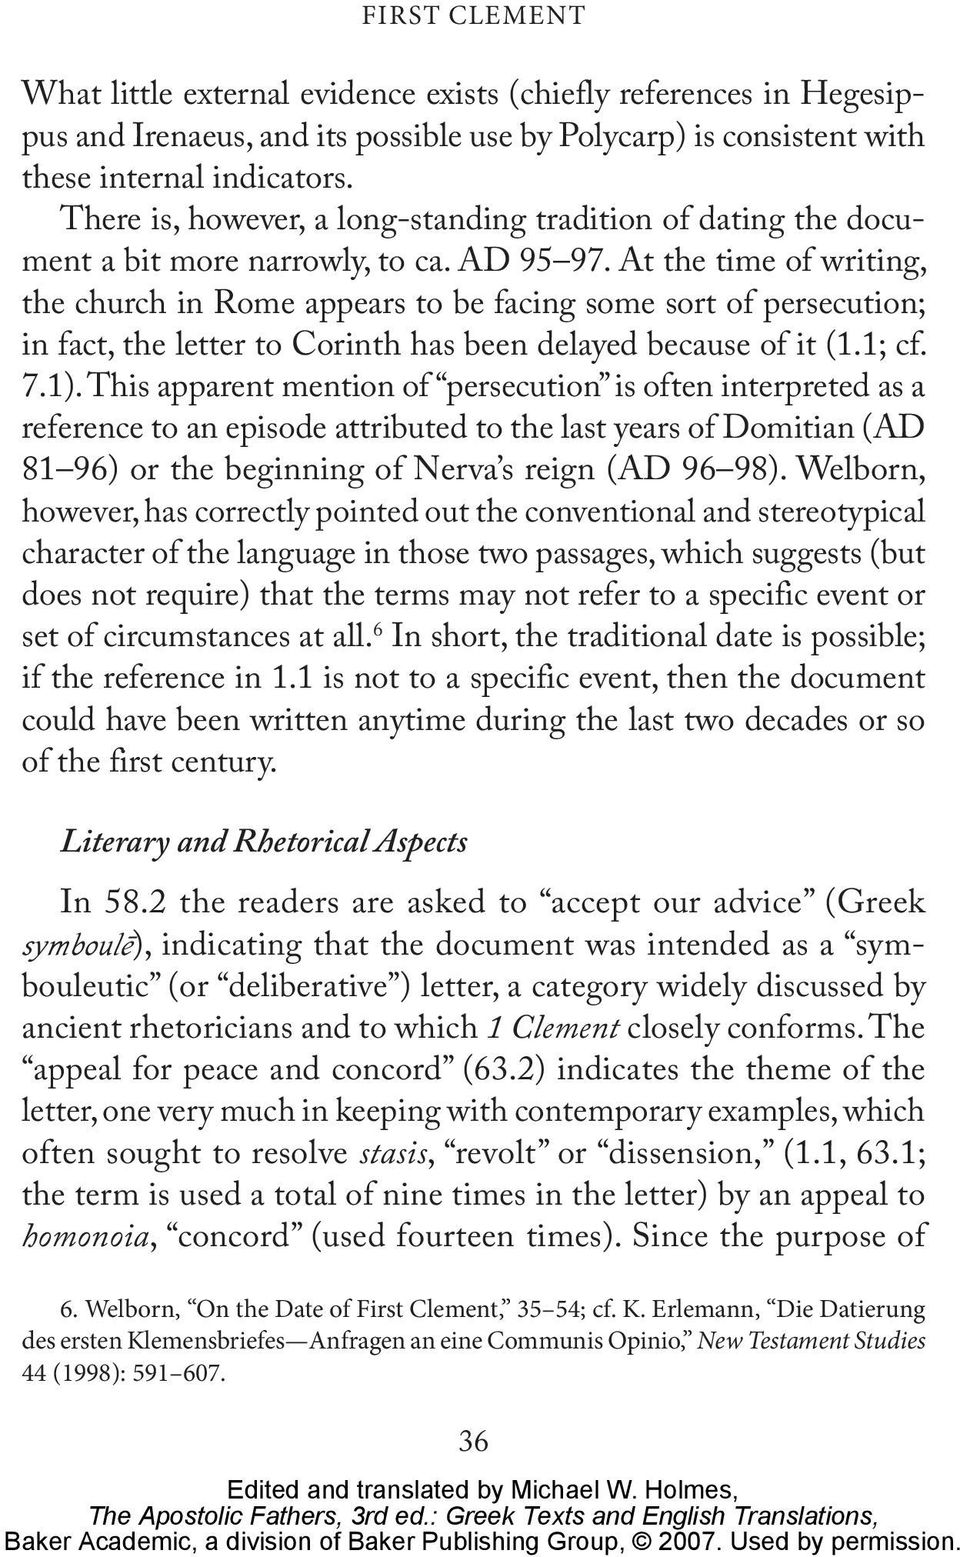 At the time of writing, the church in Rome appears to be facing some sort of persecution; in fact, the letter to Corinth has been delayed because of it (1.1; cf. 7.1).